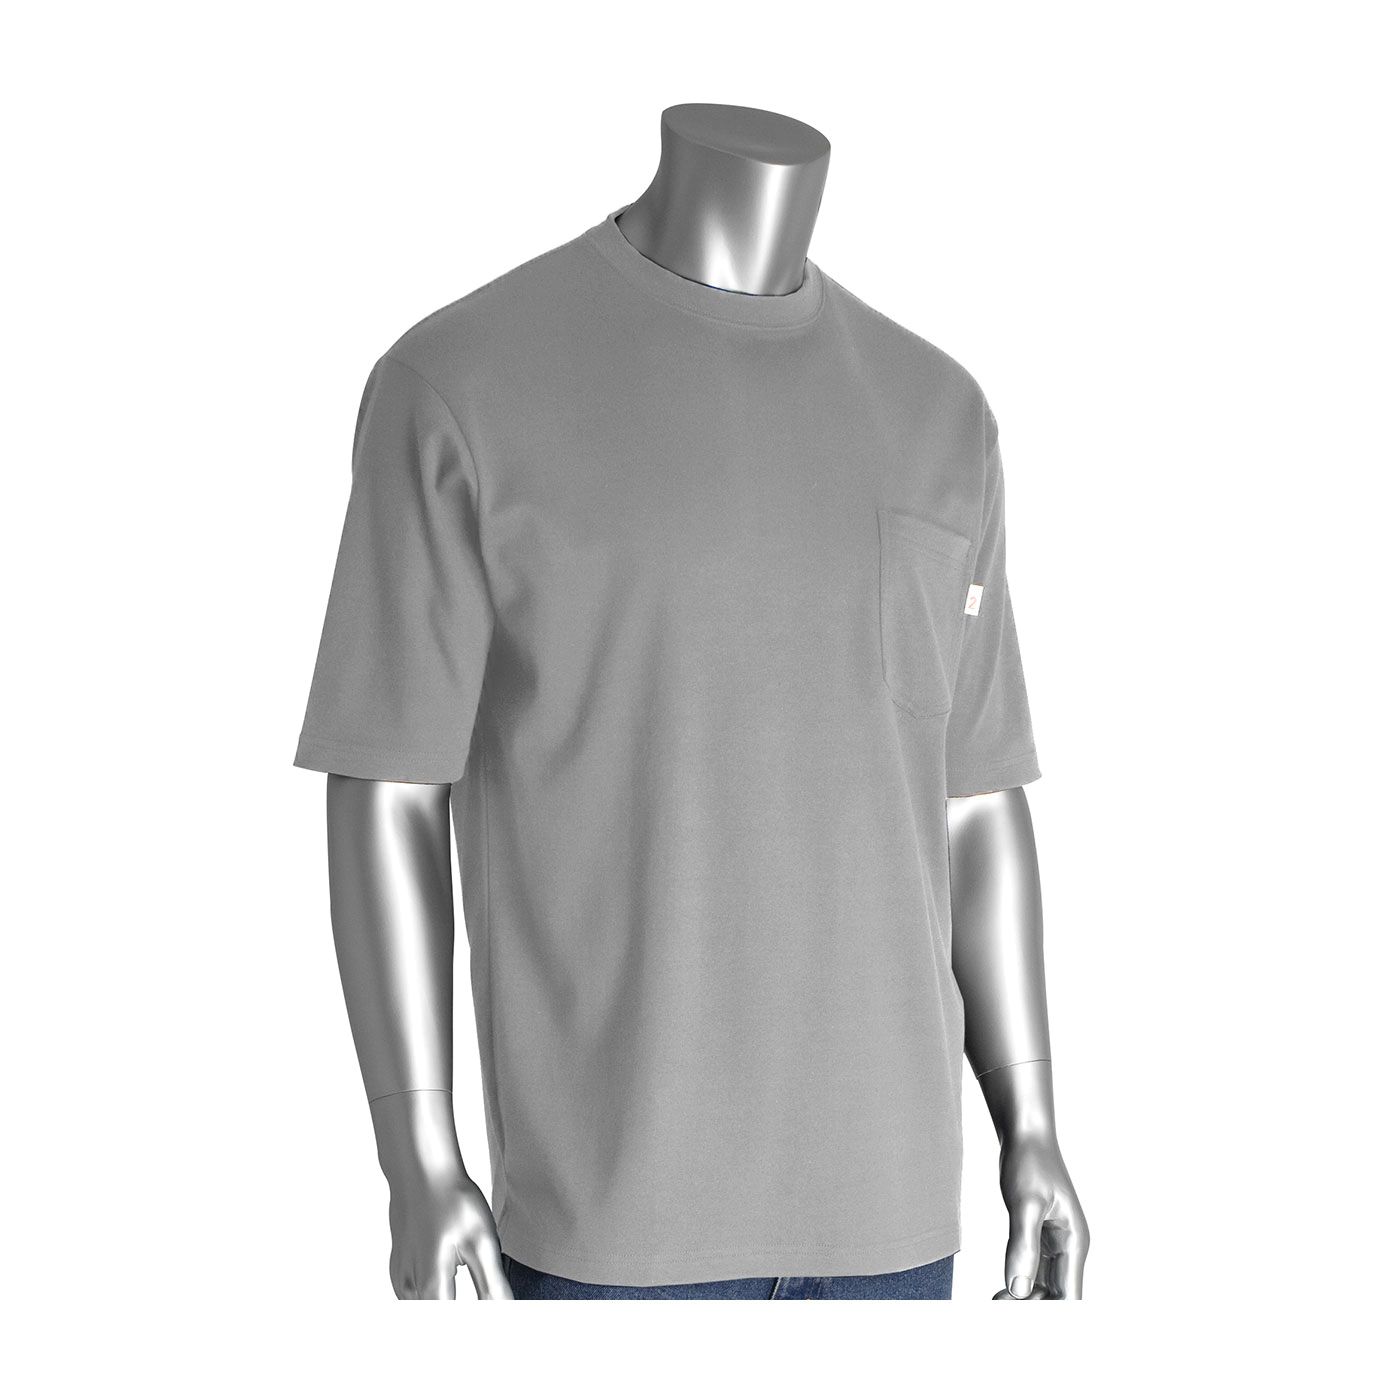 PIP® 385-FRSS-LG/M Arc and Flame-Resistant Short Sleeve T-Shirt, M, Light Gray, Cotton Interlock Knit, 30 in L